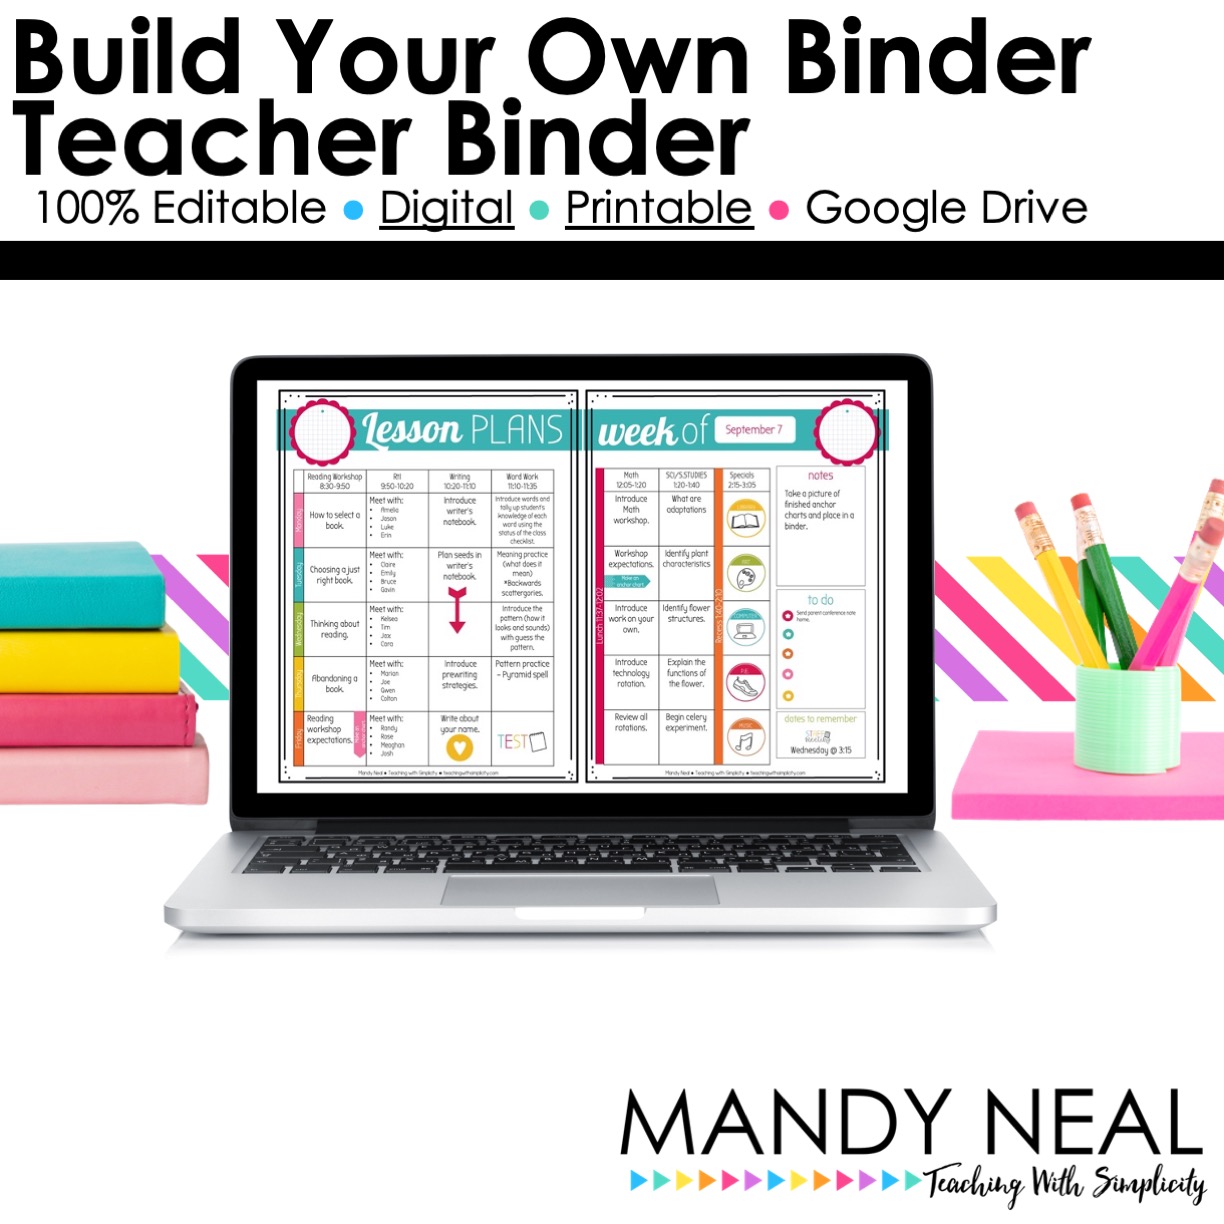 Build your own binder from Mandy Neal at Teaching With Simplicity